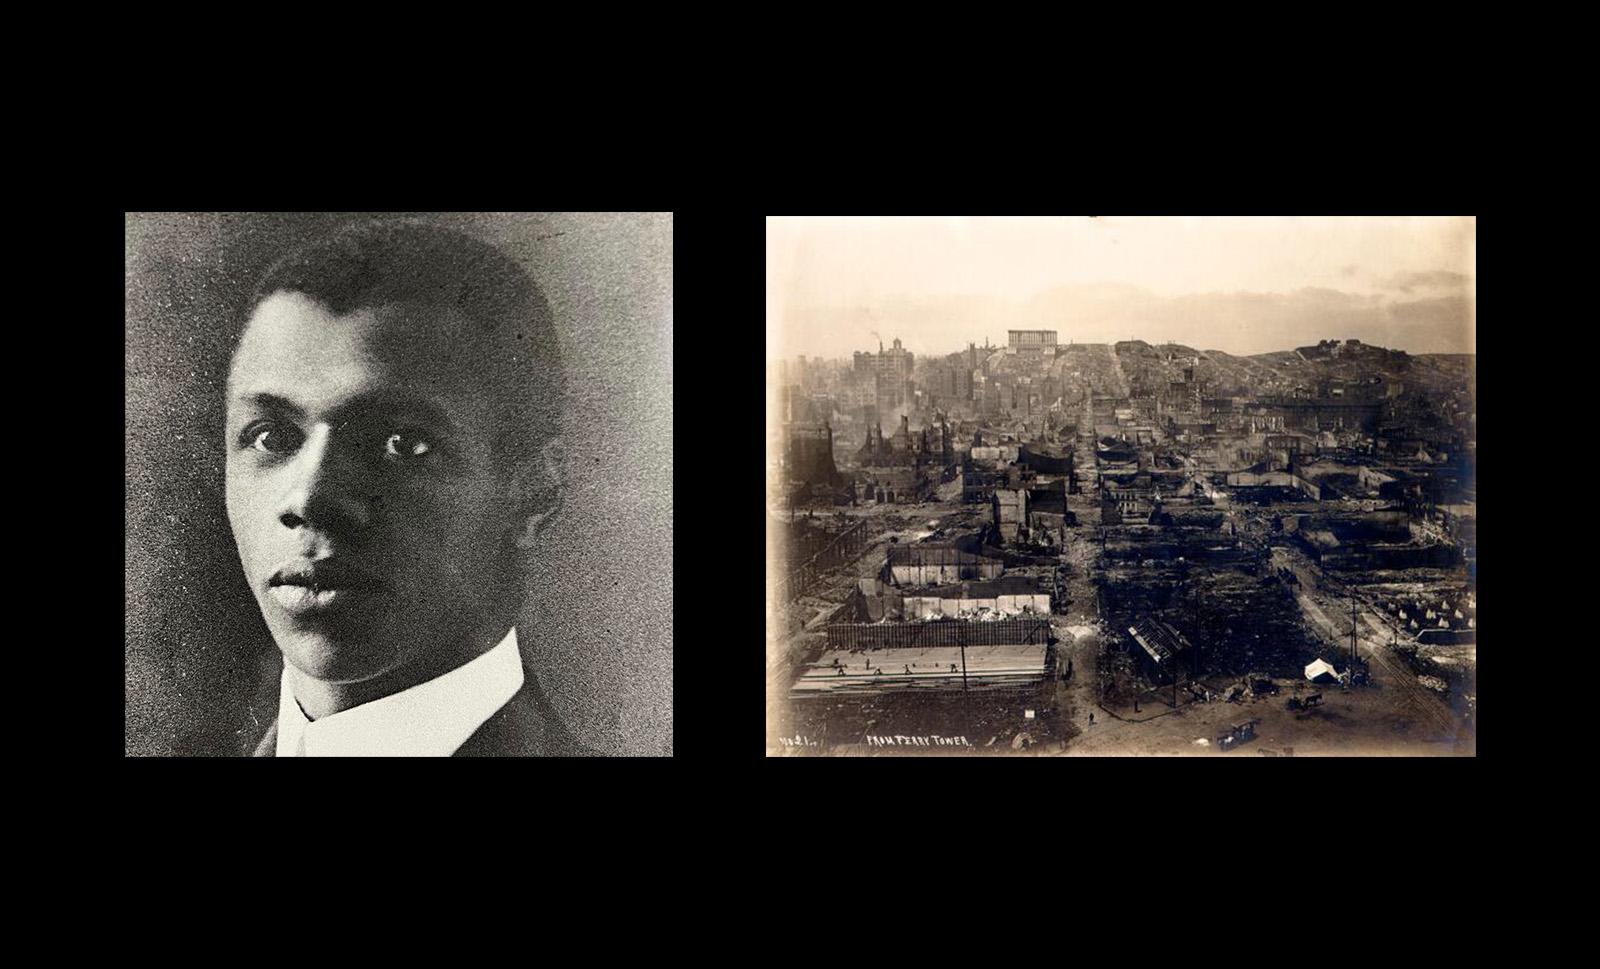 two images: a portrait of a young Aurelious Alberga and an image of San Francisco after the 1906 earthquake